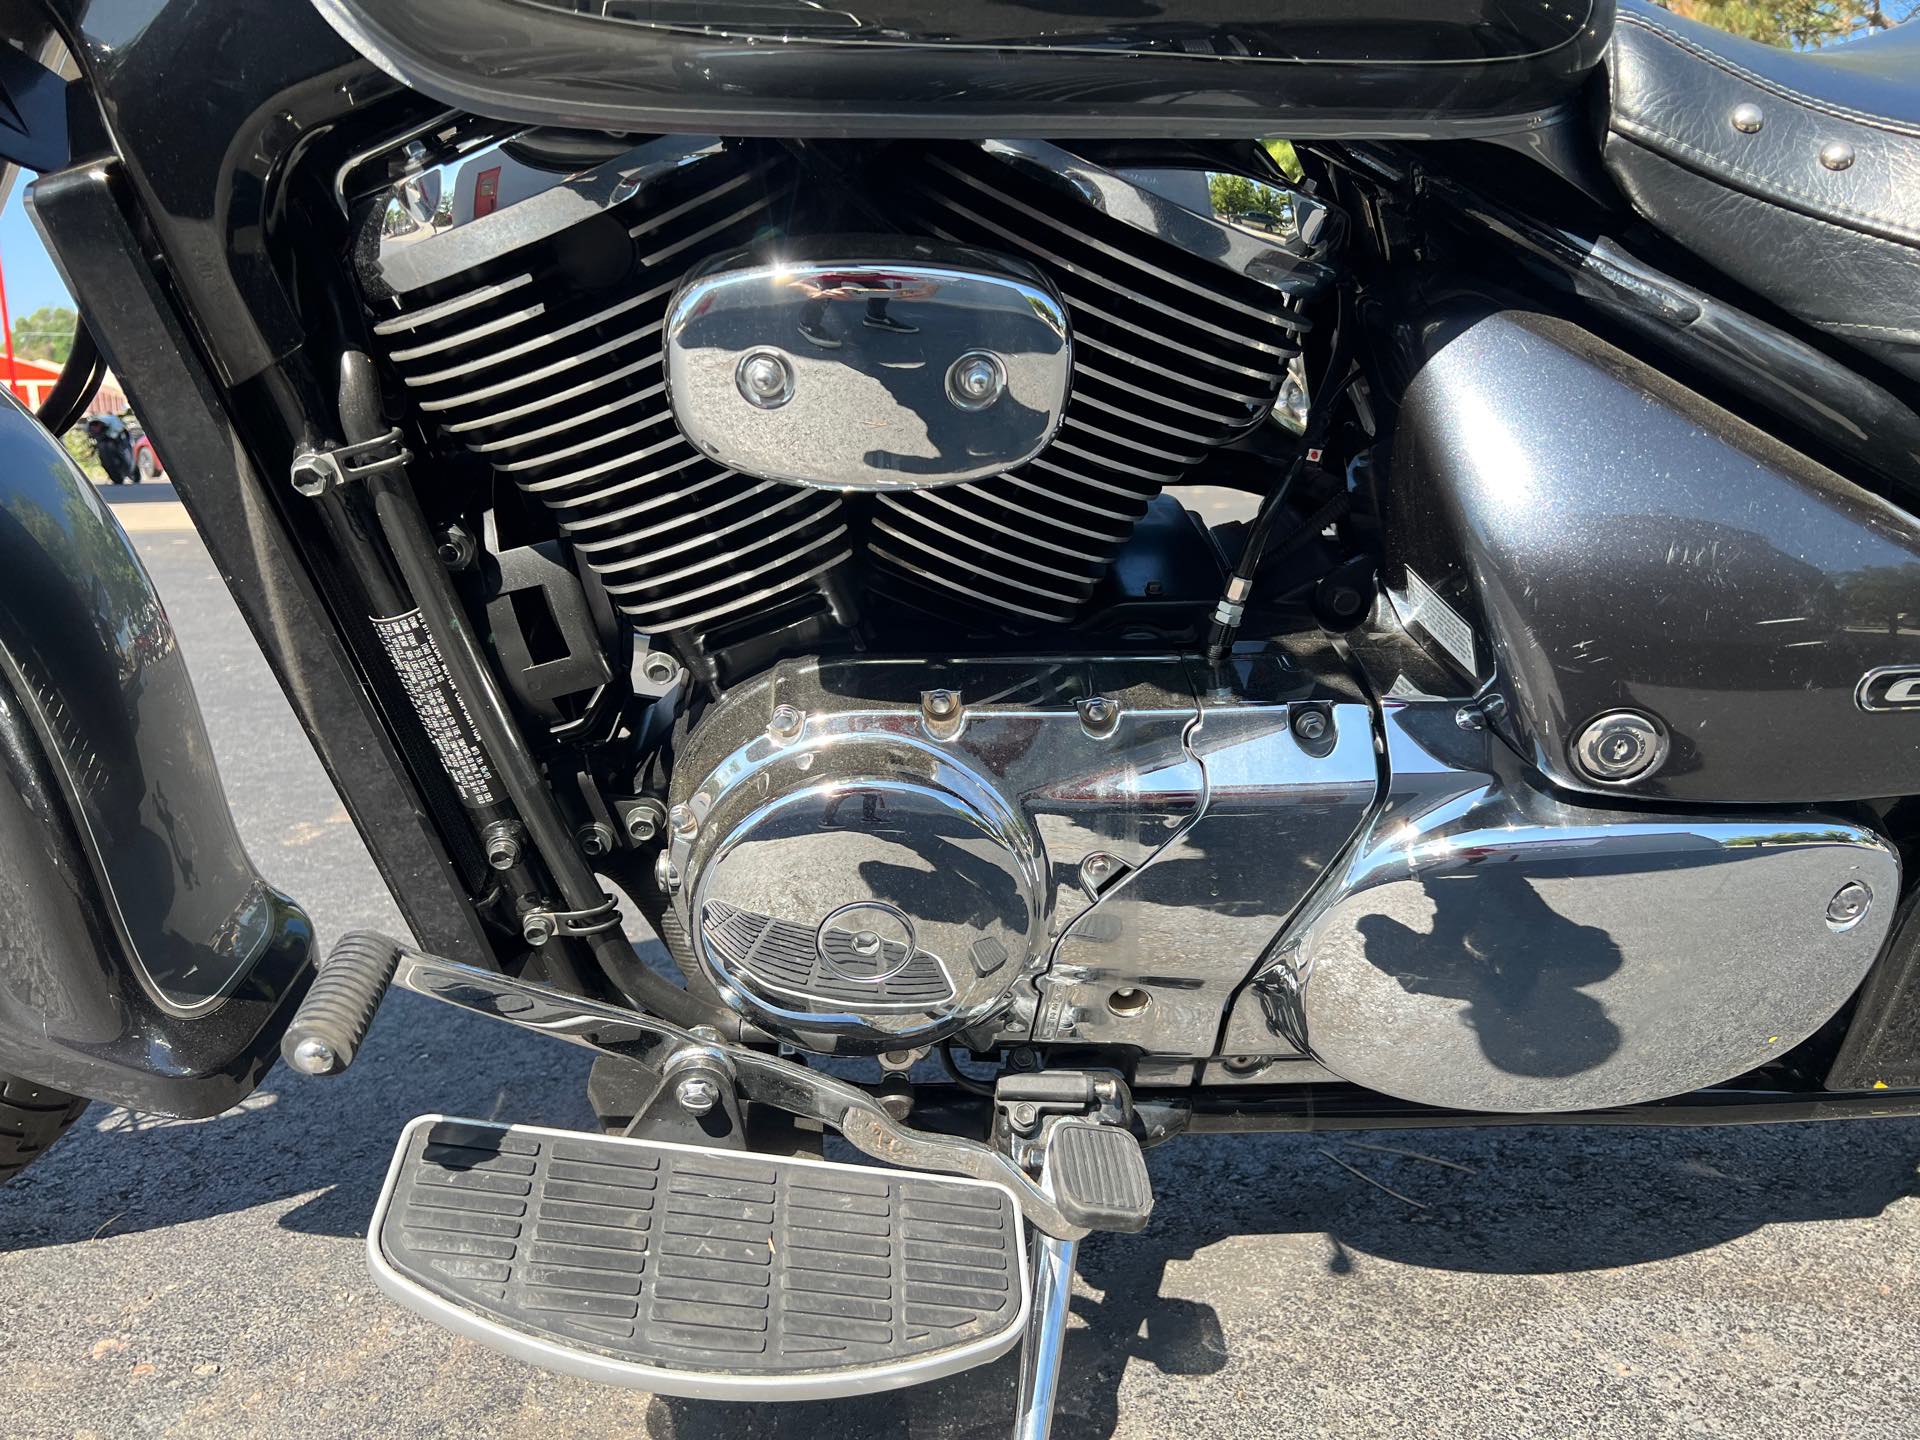 2008 Suzuki Boulevard C50 at Aces Motorcycles - Fort Collins